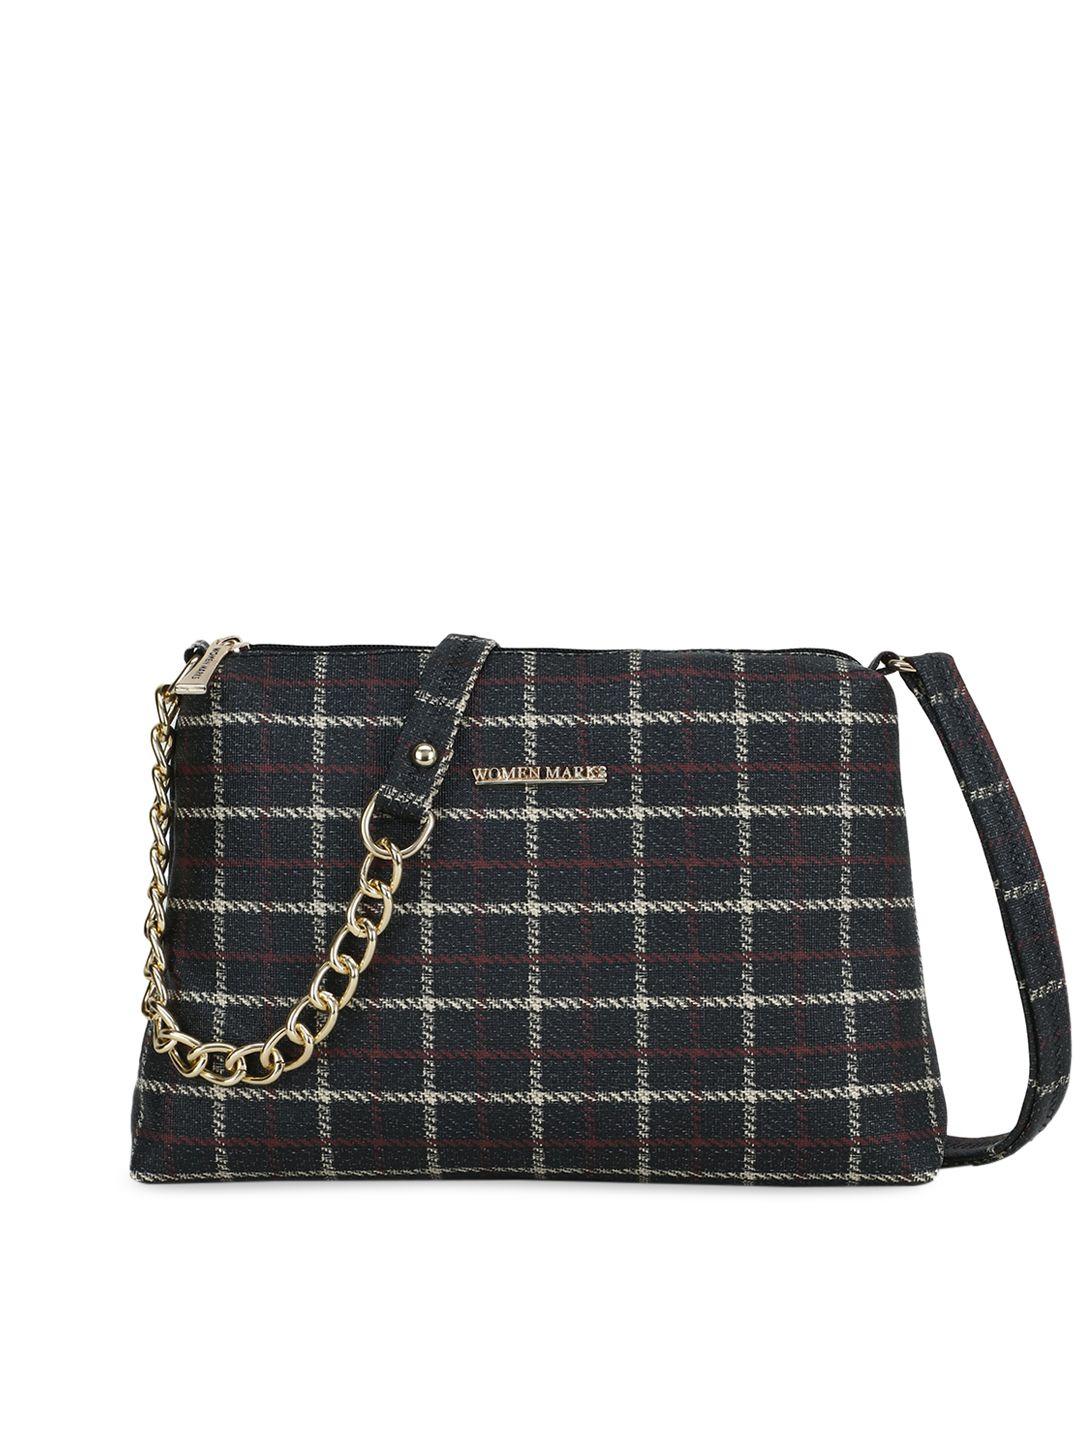 women marks black checked pu structured sling bag